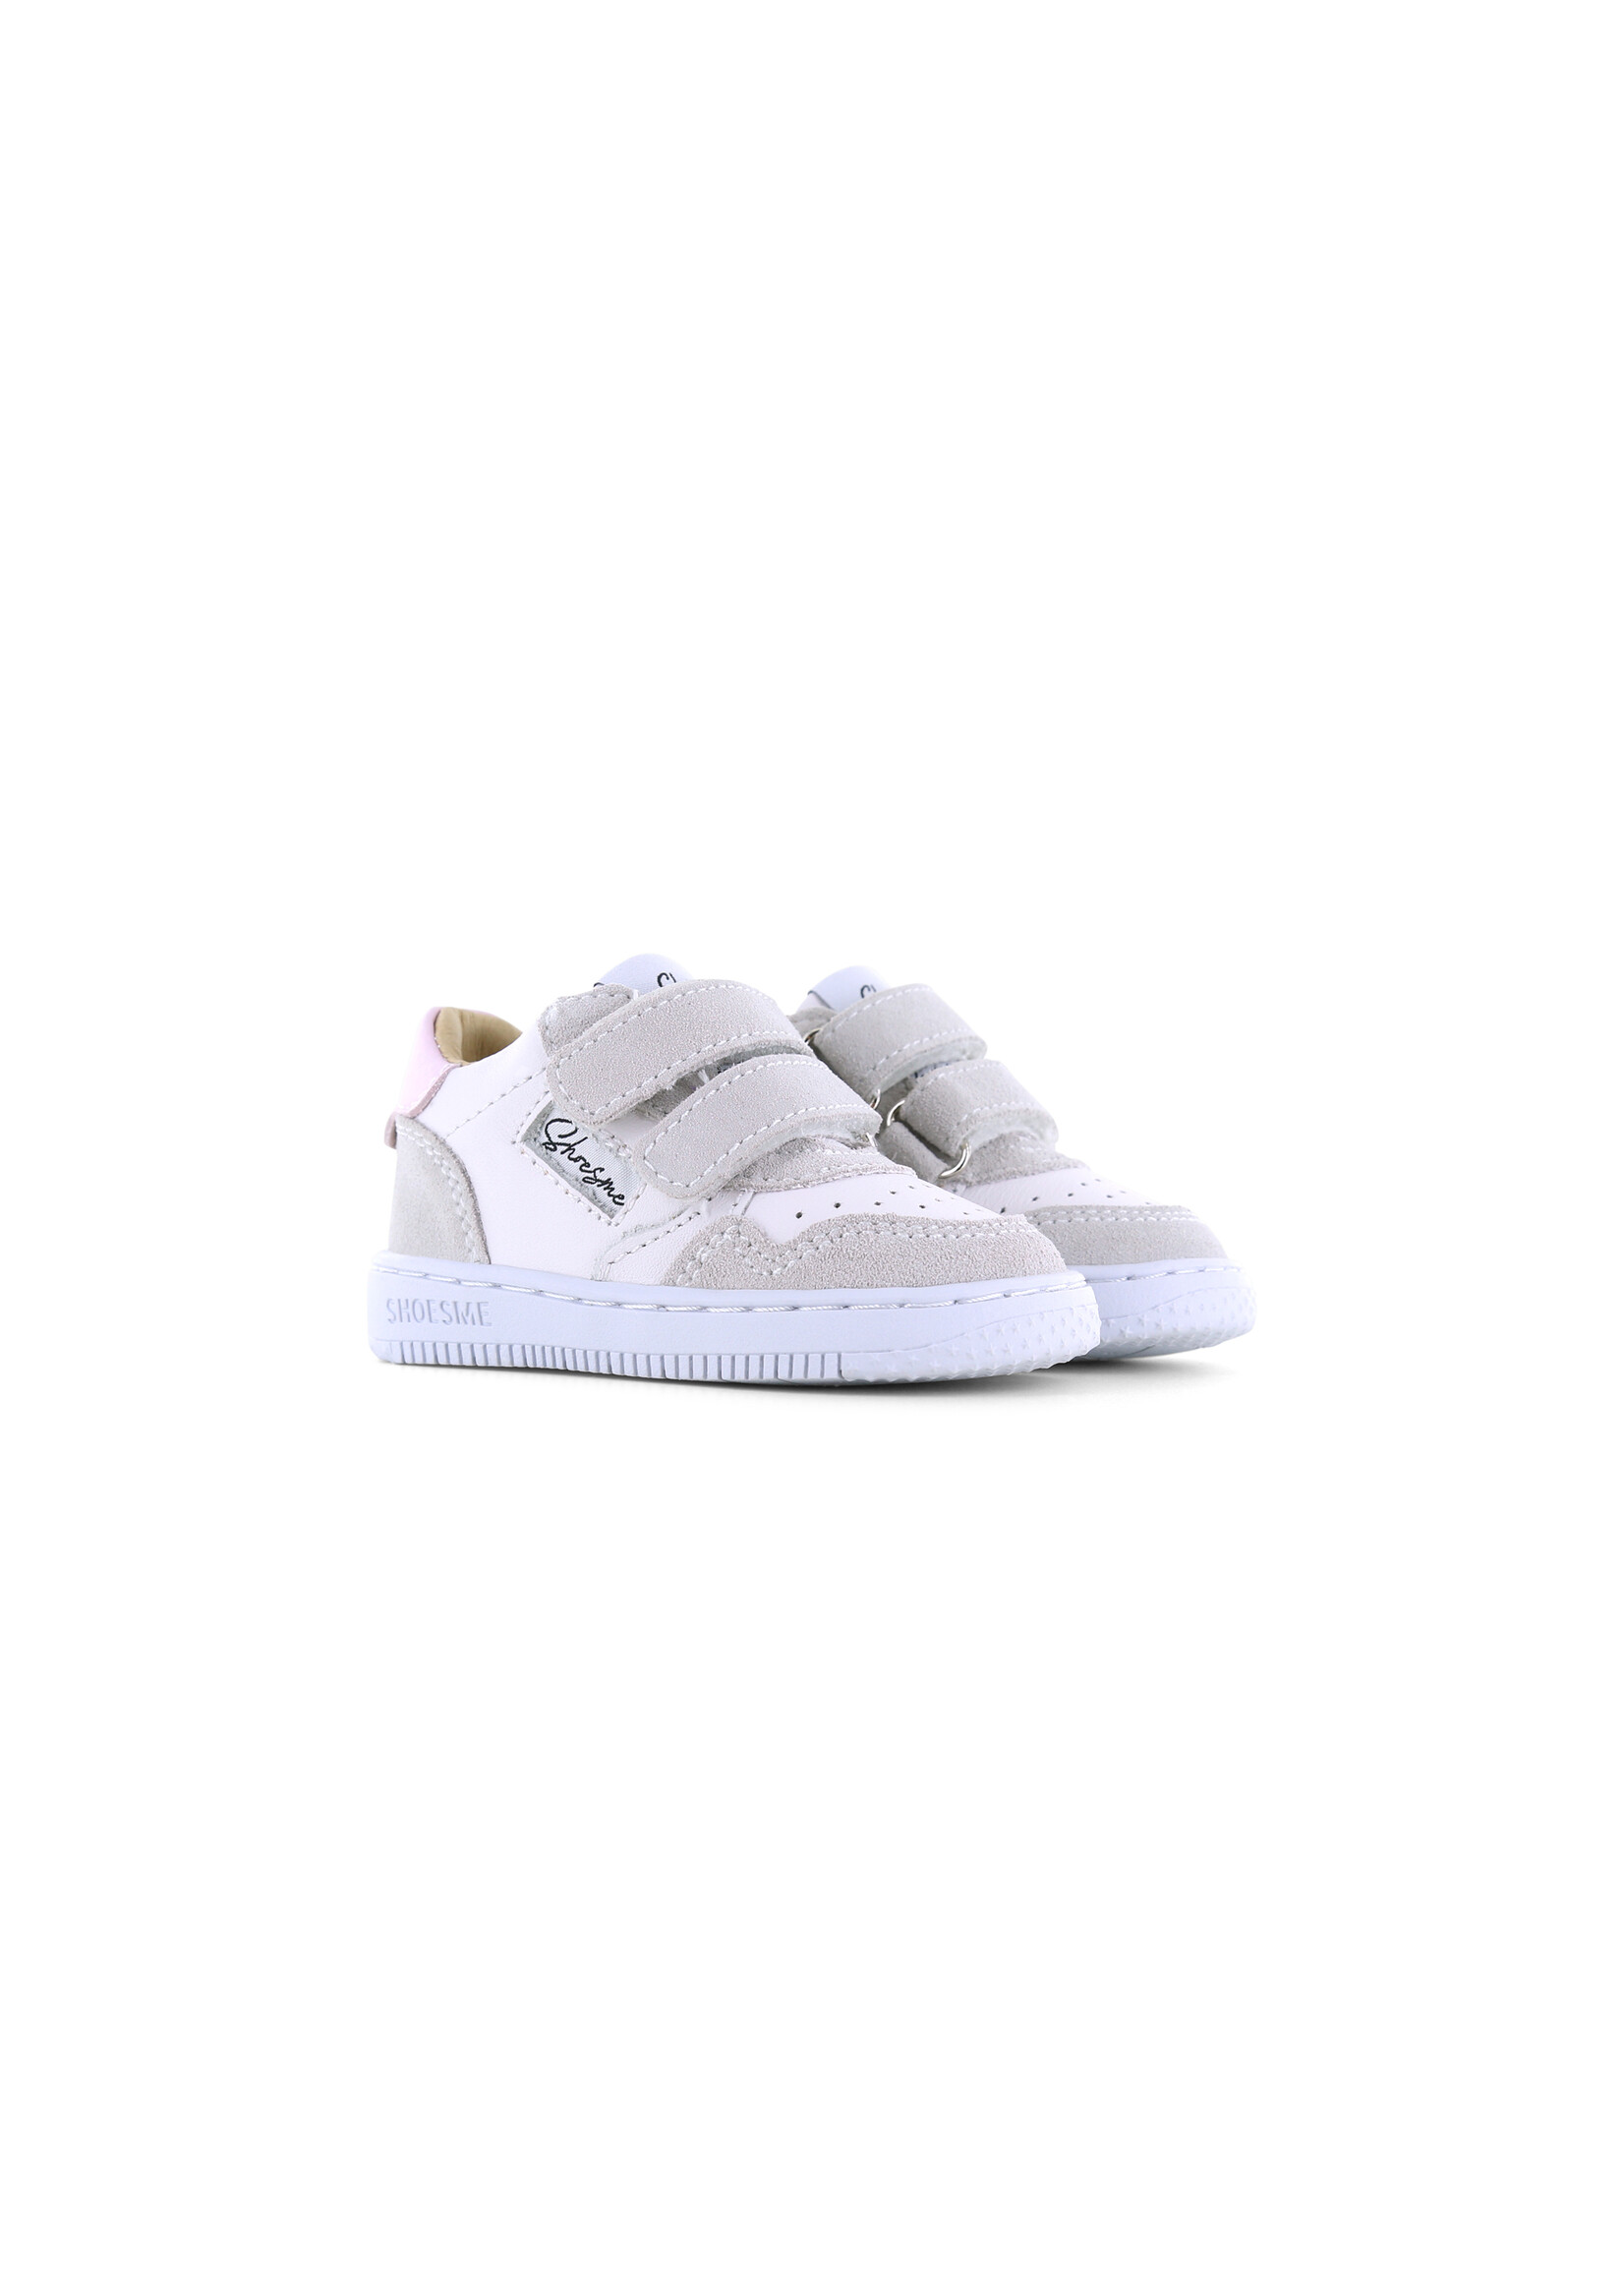 Shoesme BN24S015-A White Beige Pink